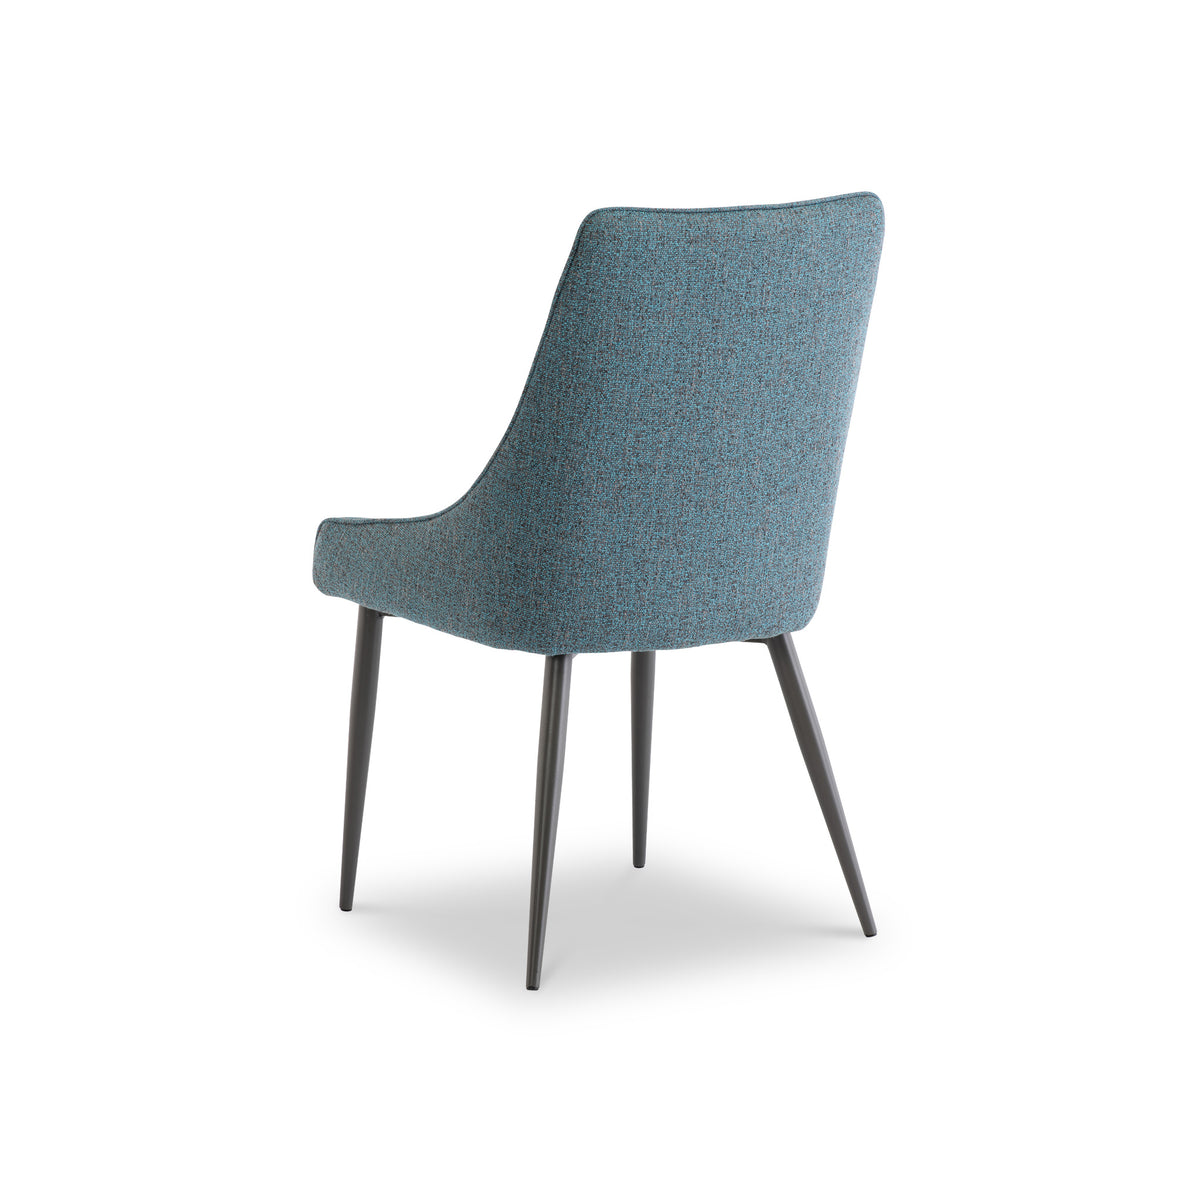 Rio Teal Dining Chair